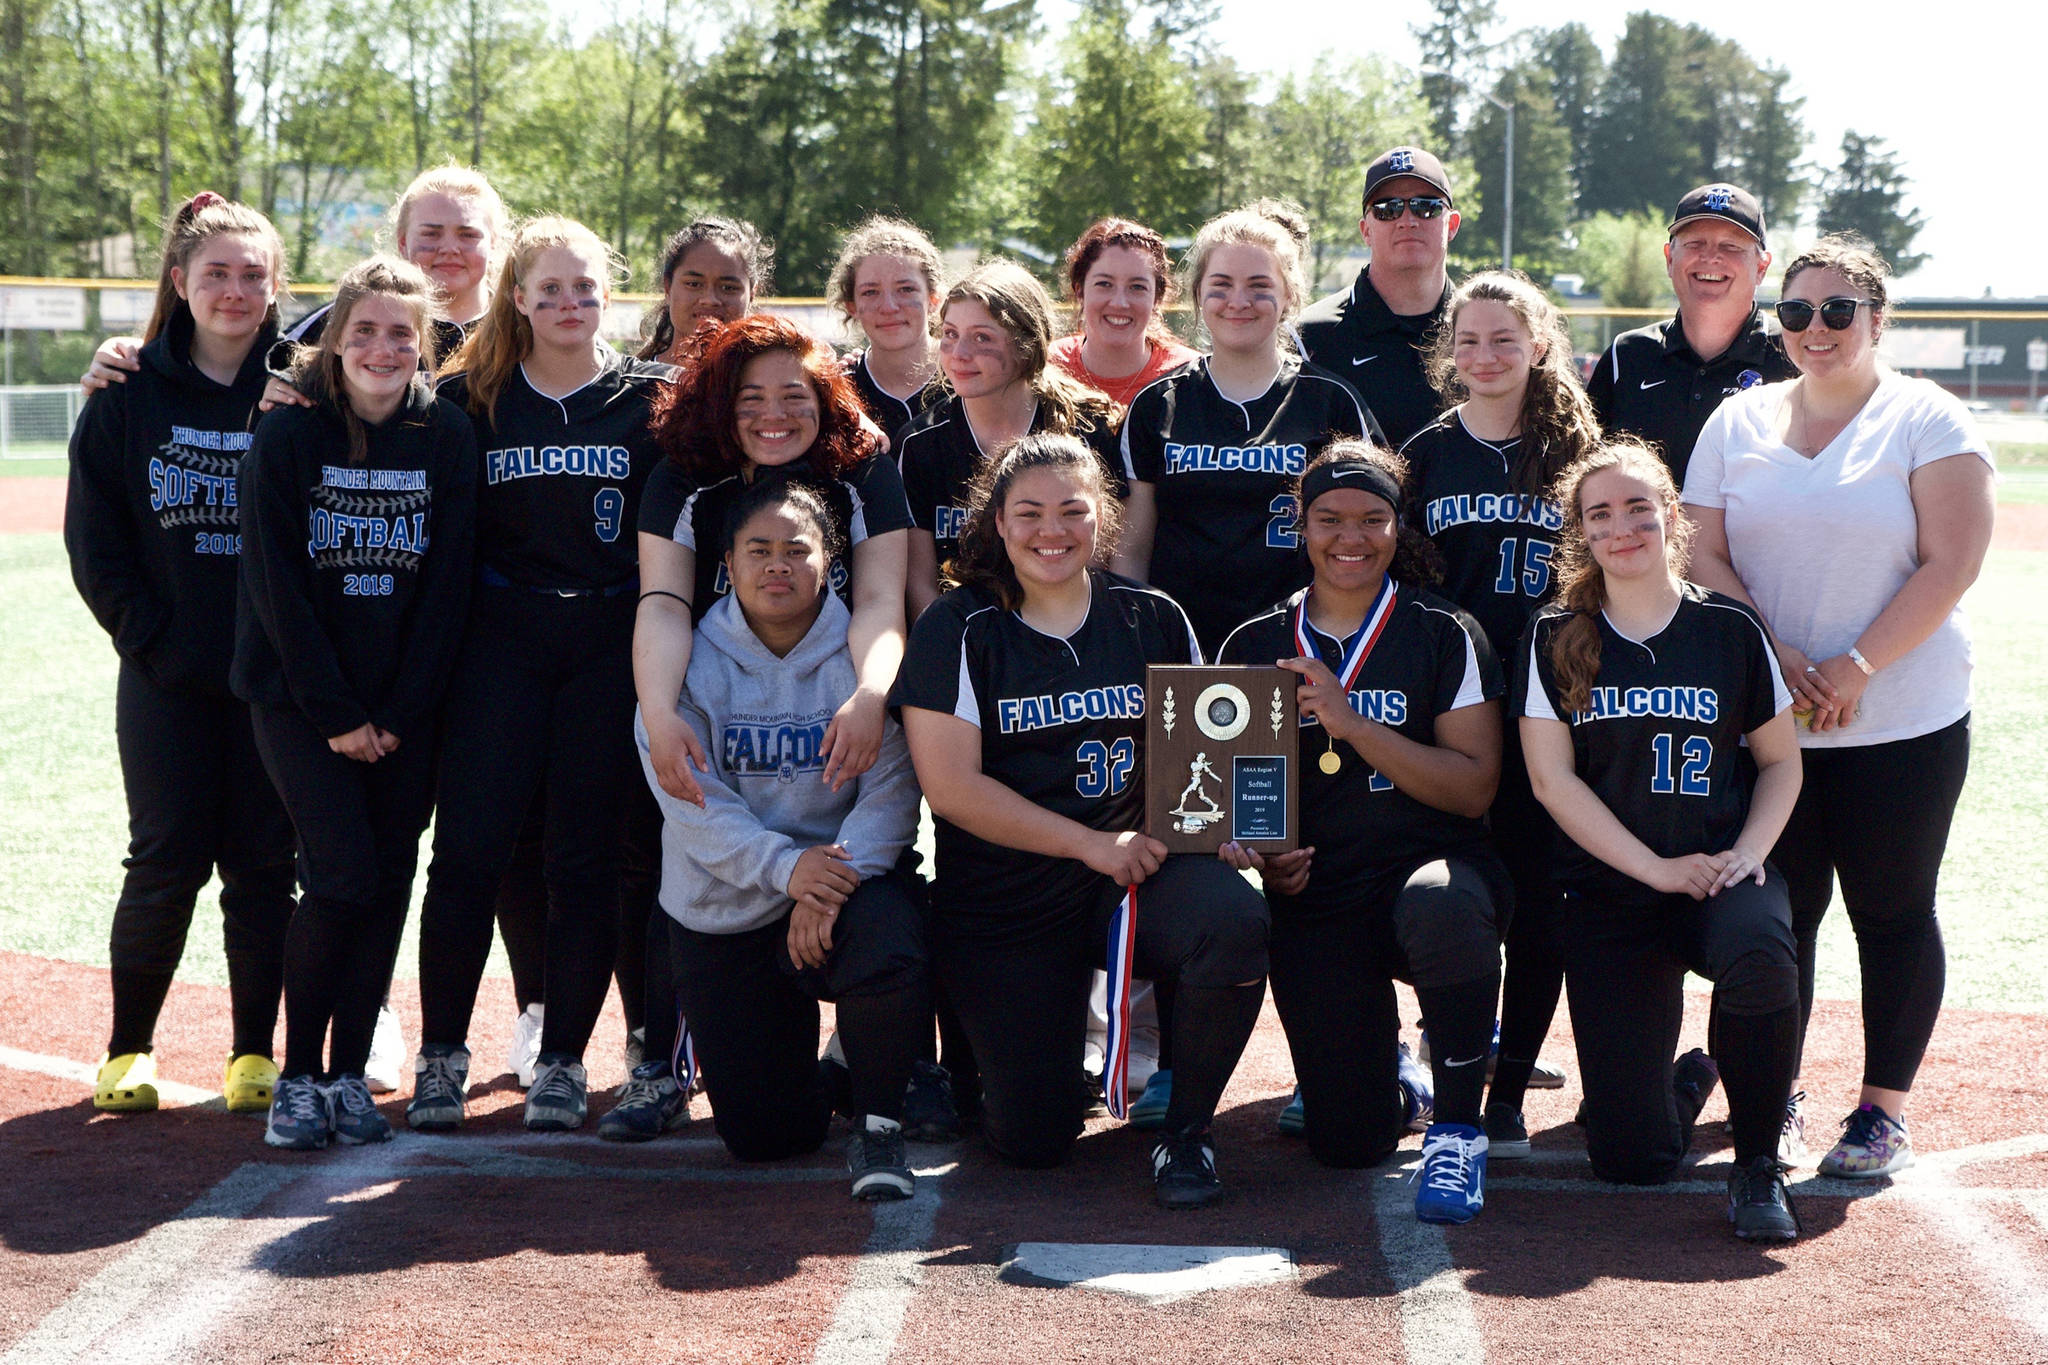 The Thunder Mountain High softball team poses for a photo after finishing second at the Region V tournament on Saturday, May 25, 2019. (Courtesy photo | Sharla Hayes)